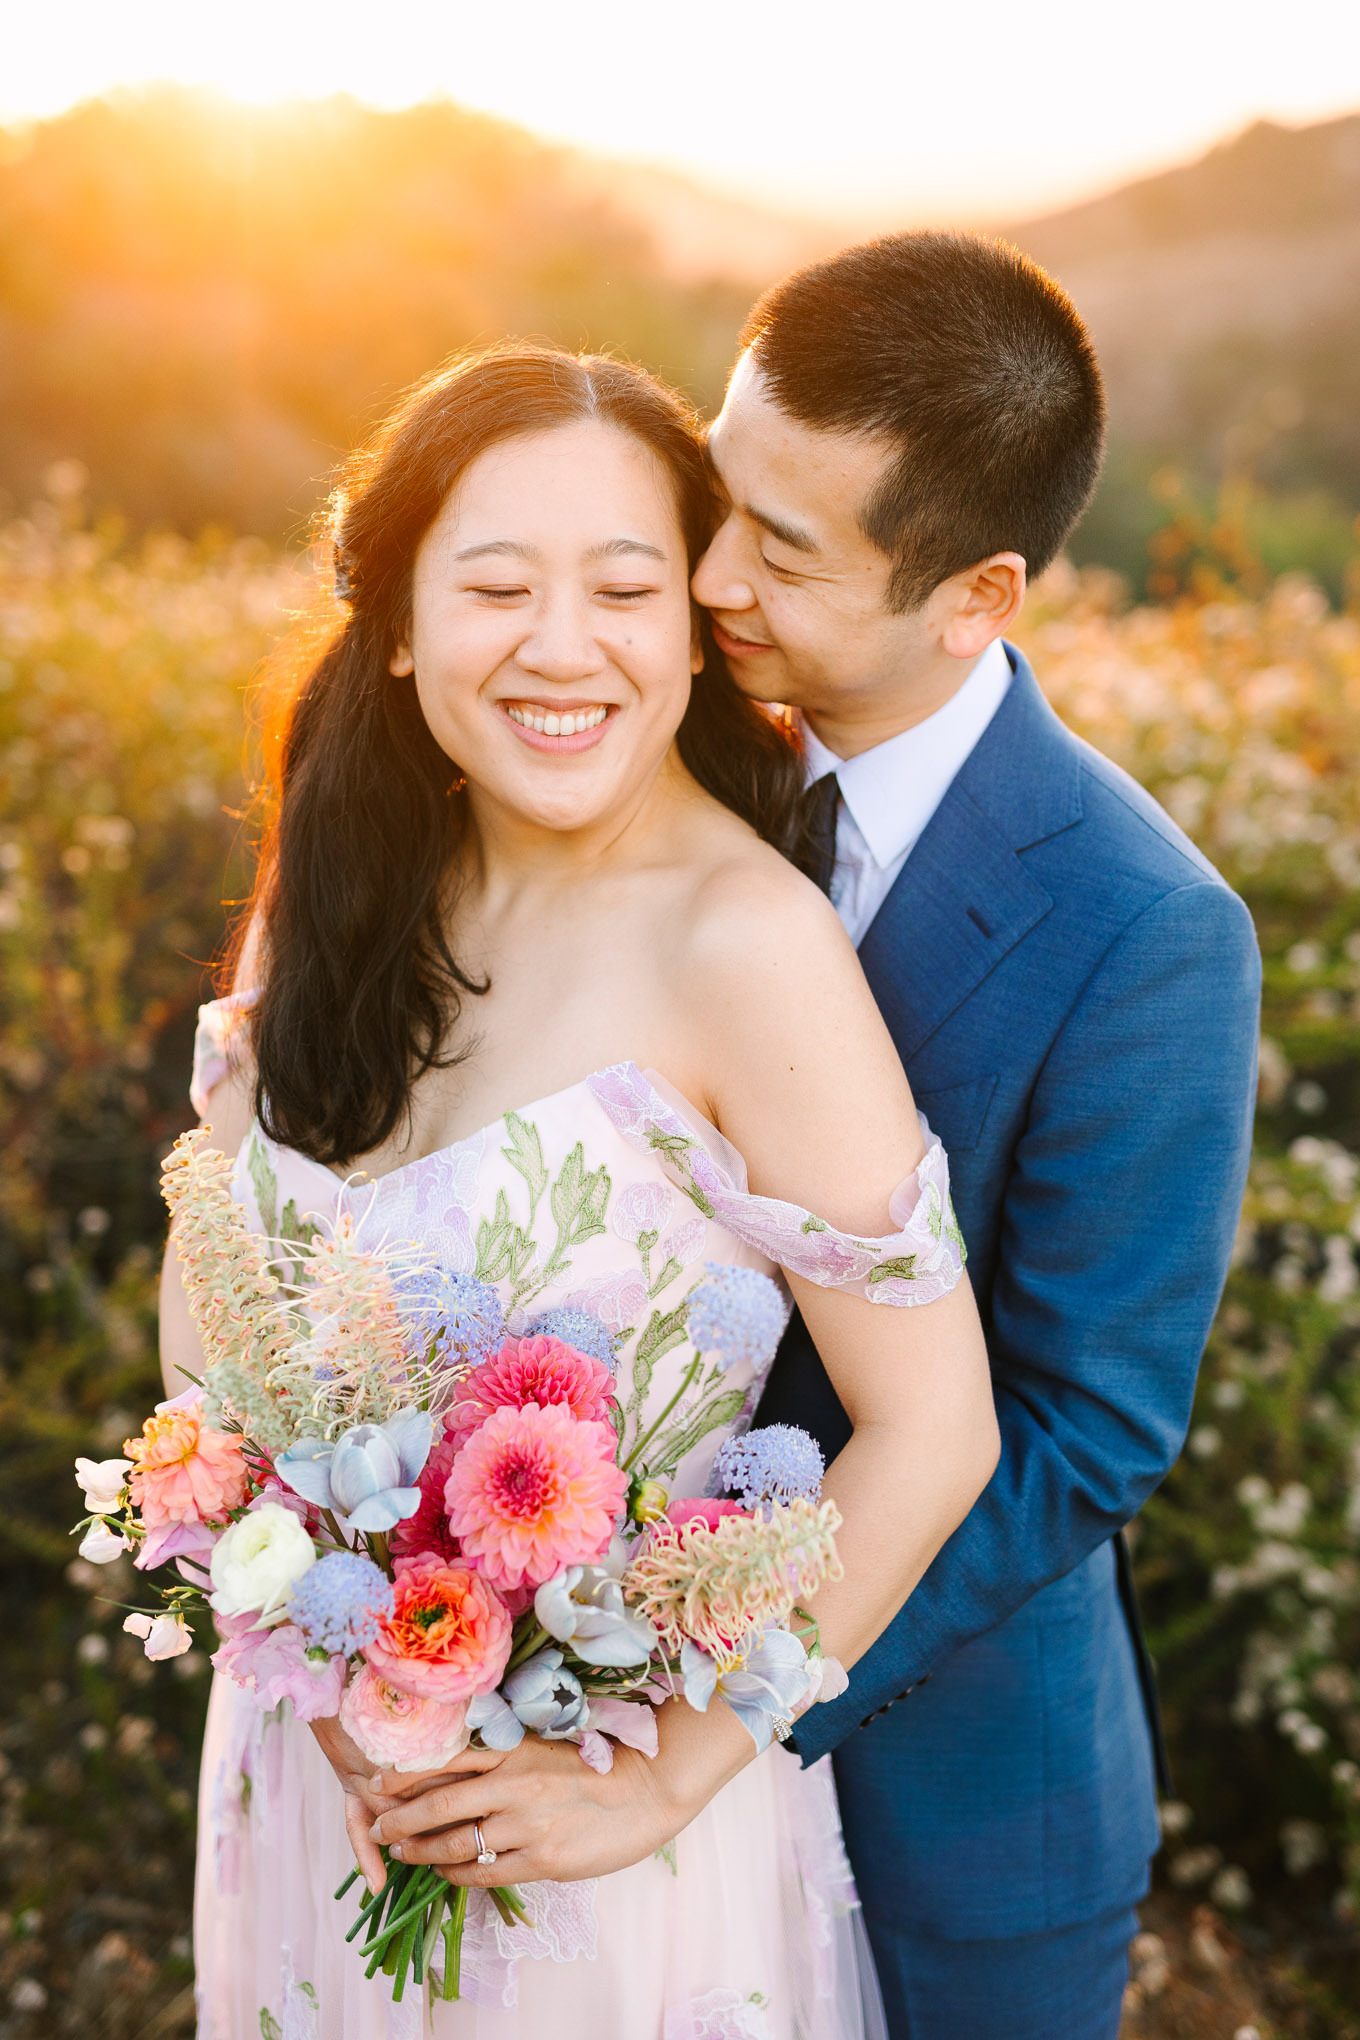 Tree People sunset elopement | Wedding and elopement photography roundup | Los Angeles and Palm Springs photographer | #losangeleswedding #palmspringswedding #elopementphotographer Source: Mary Costa Photography | Los Angeles